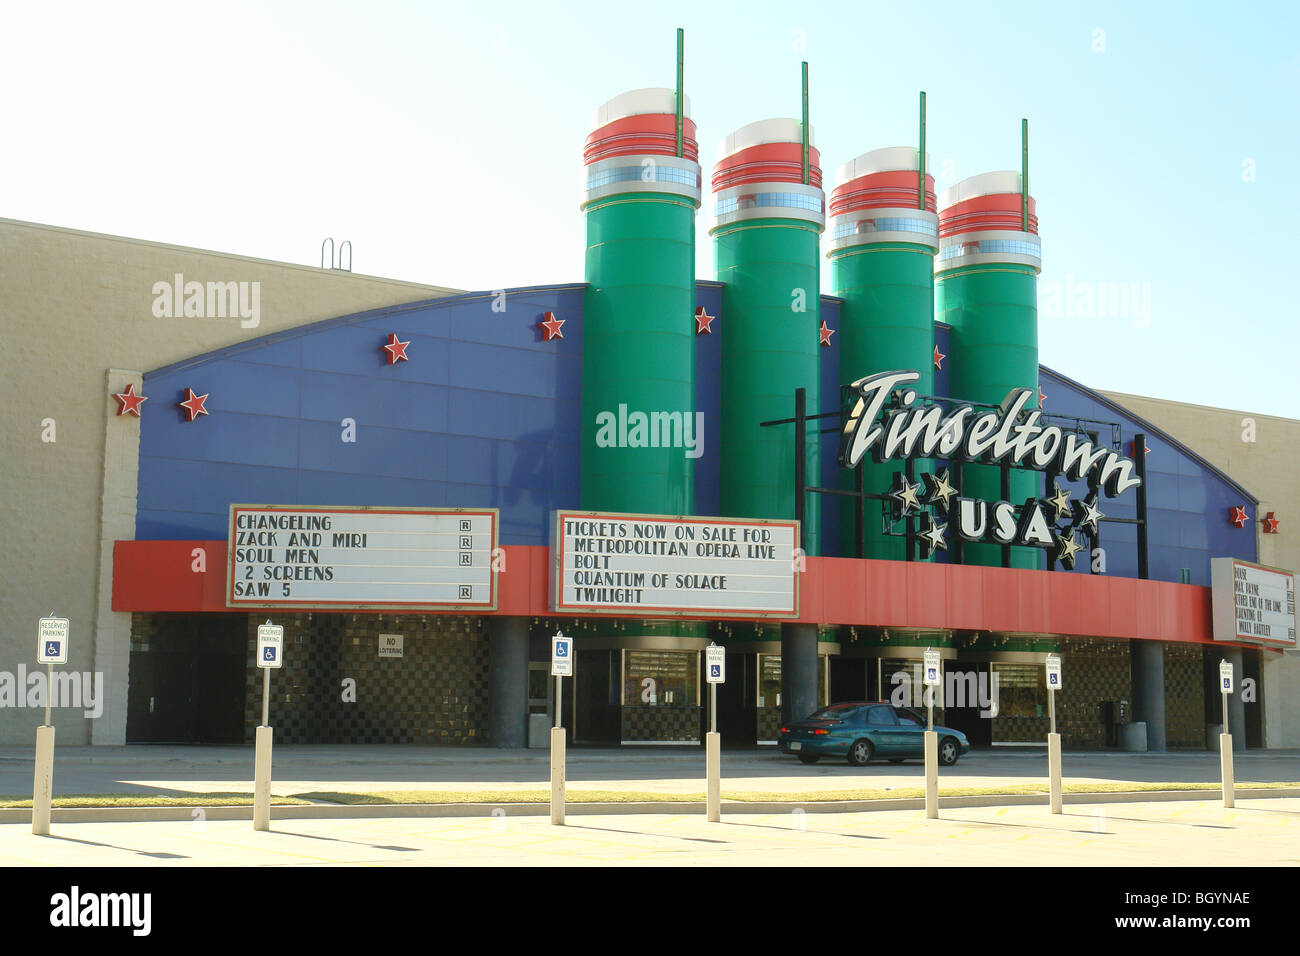 How do you find movie times for the Tinseltown movie theater?